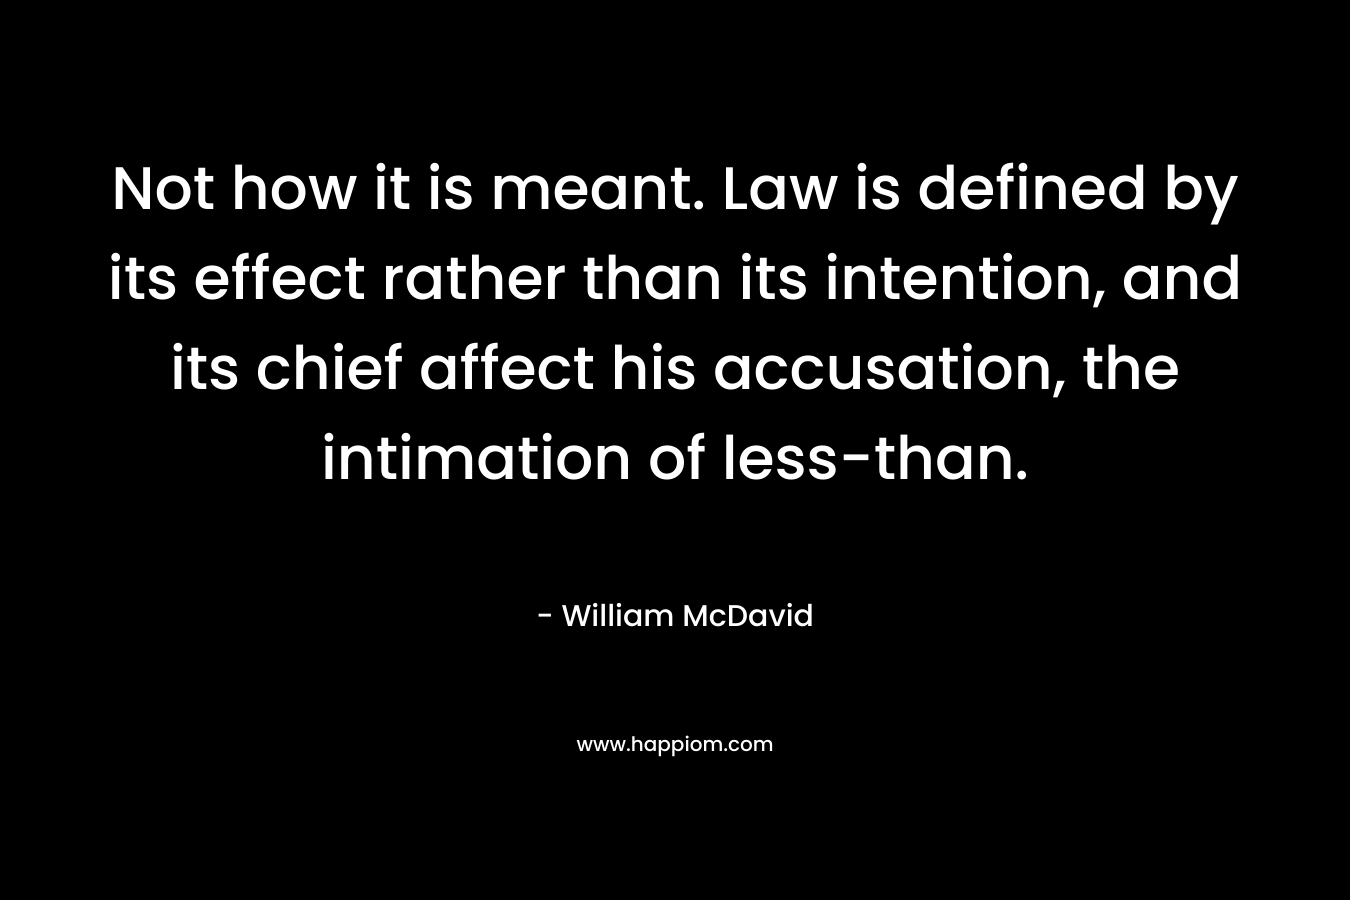 Not how it is meant. Law is defined by its effect rather than its intention, and its chief affect his accusation, the intimation of less-than. – William McDavid